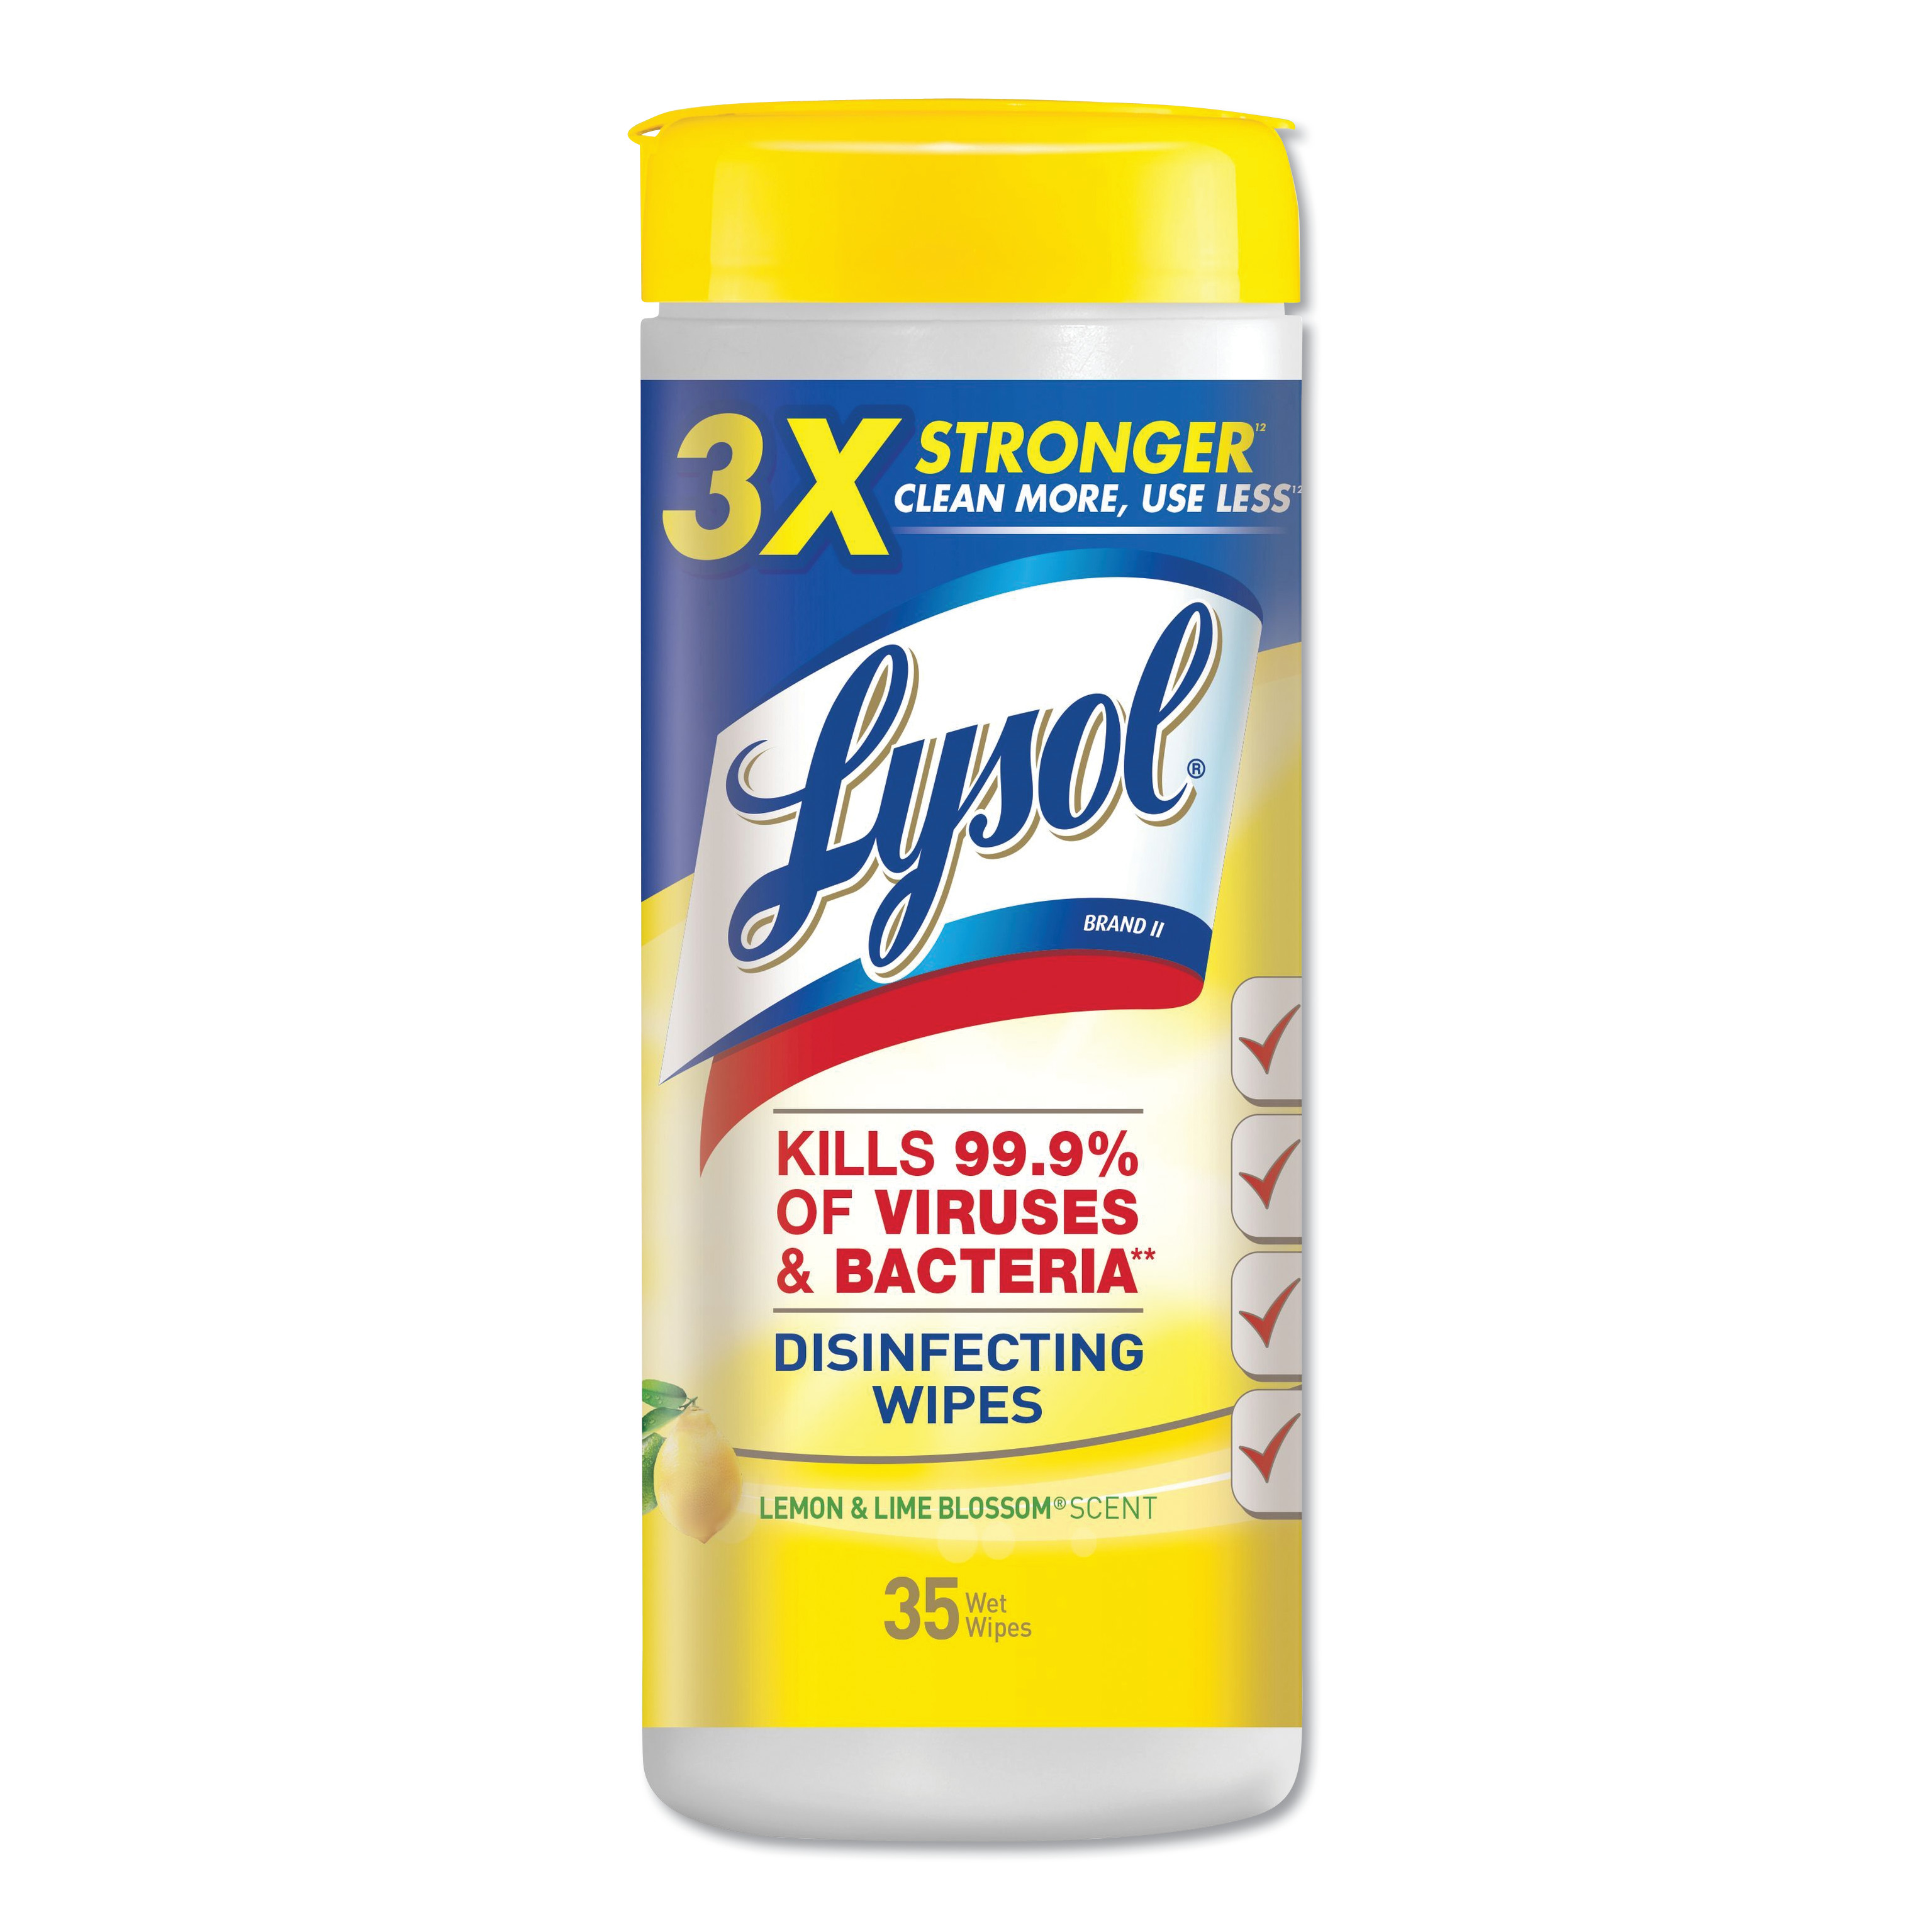 Lysol Disinfecting Wipes - 7 x 8, Lemon and Lime Blossom, 35 Wipes/Can, 12/Case